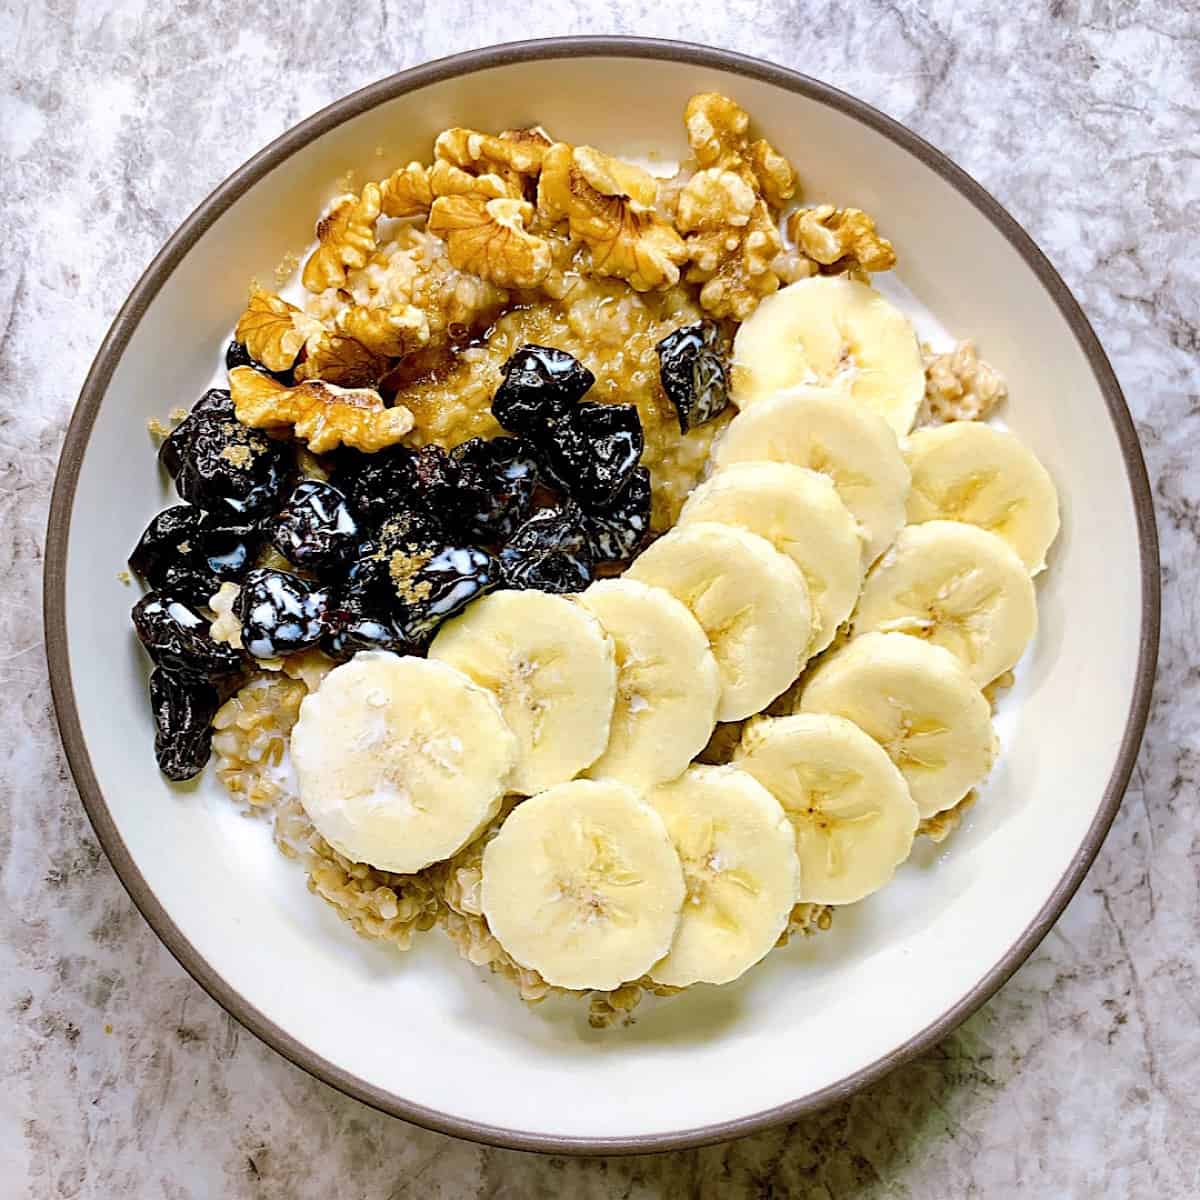 Steel Cuts Oats in bowl with banana dried cherries walnuts and brown sugar